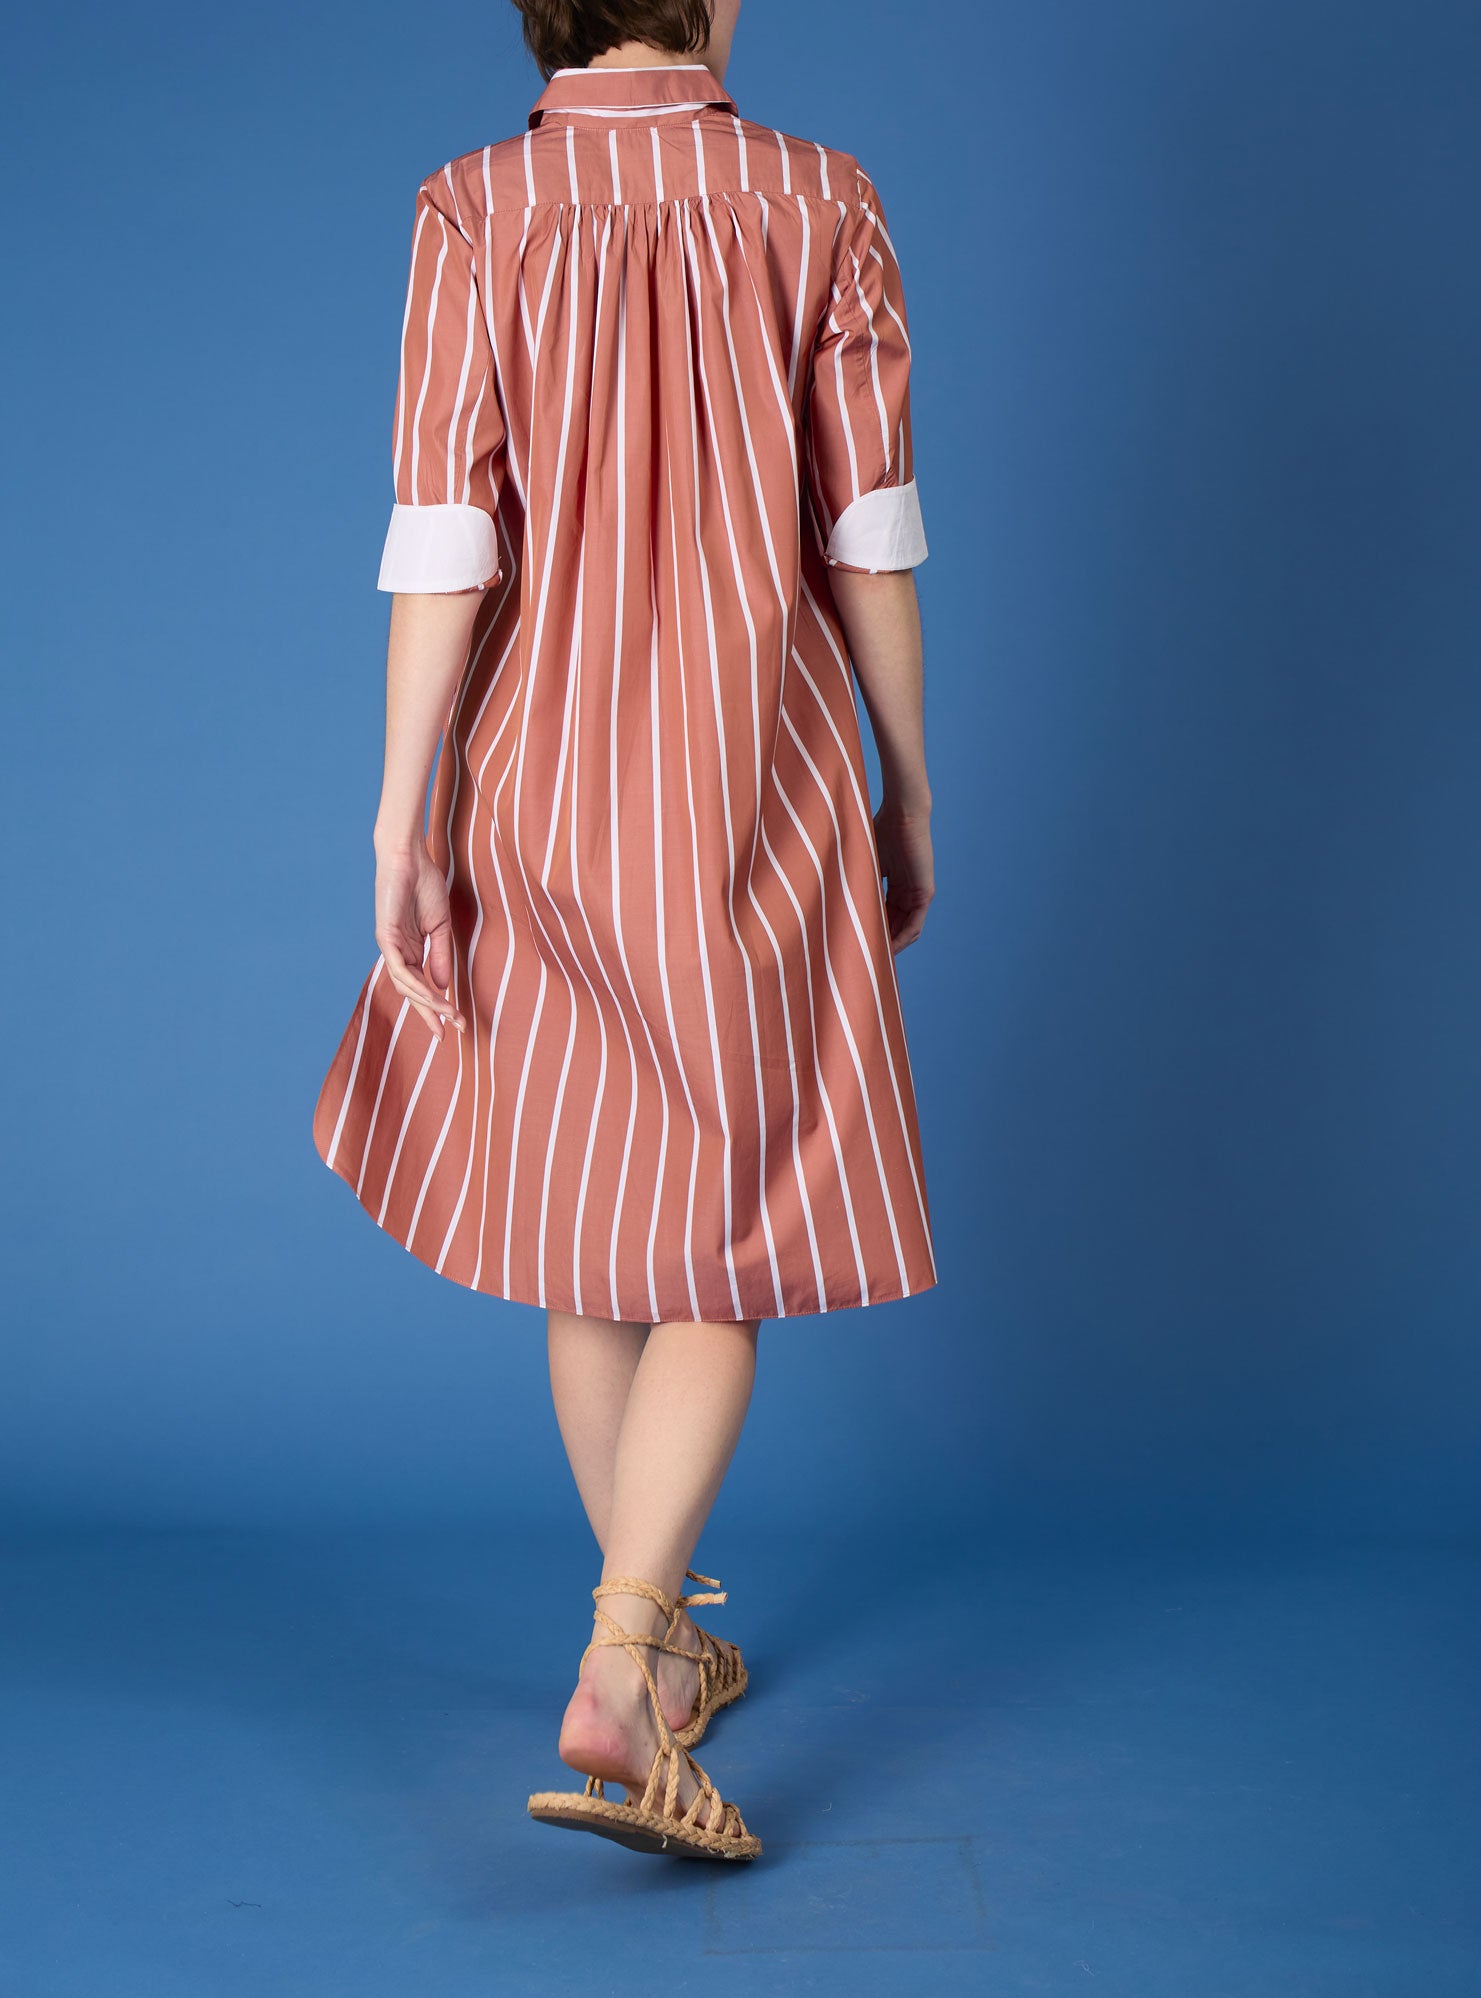 Back view - Angelica brown stripes shirt dress by Thierry Colson